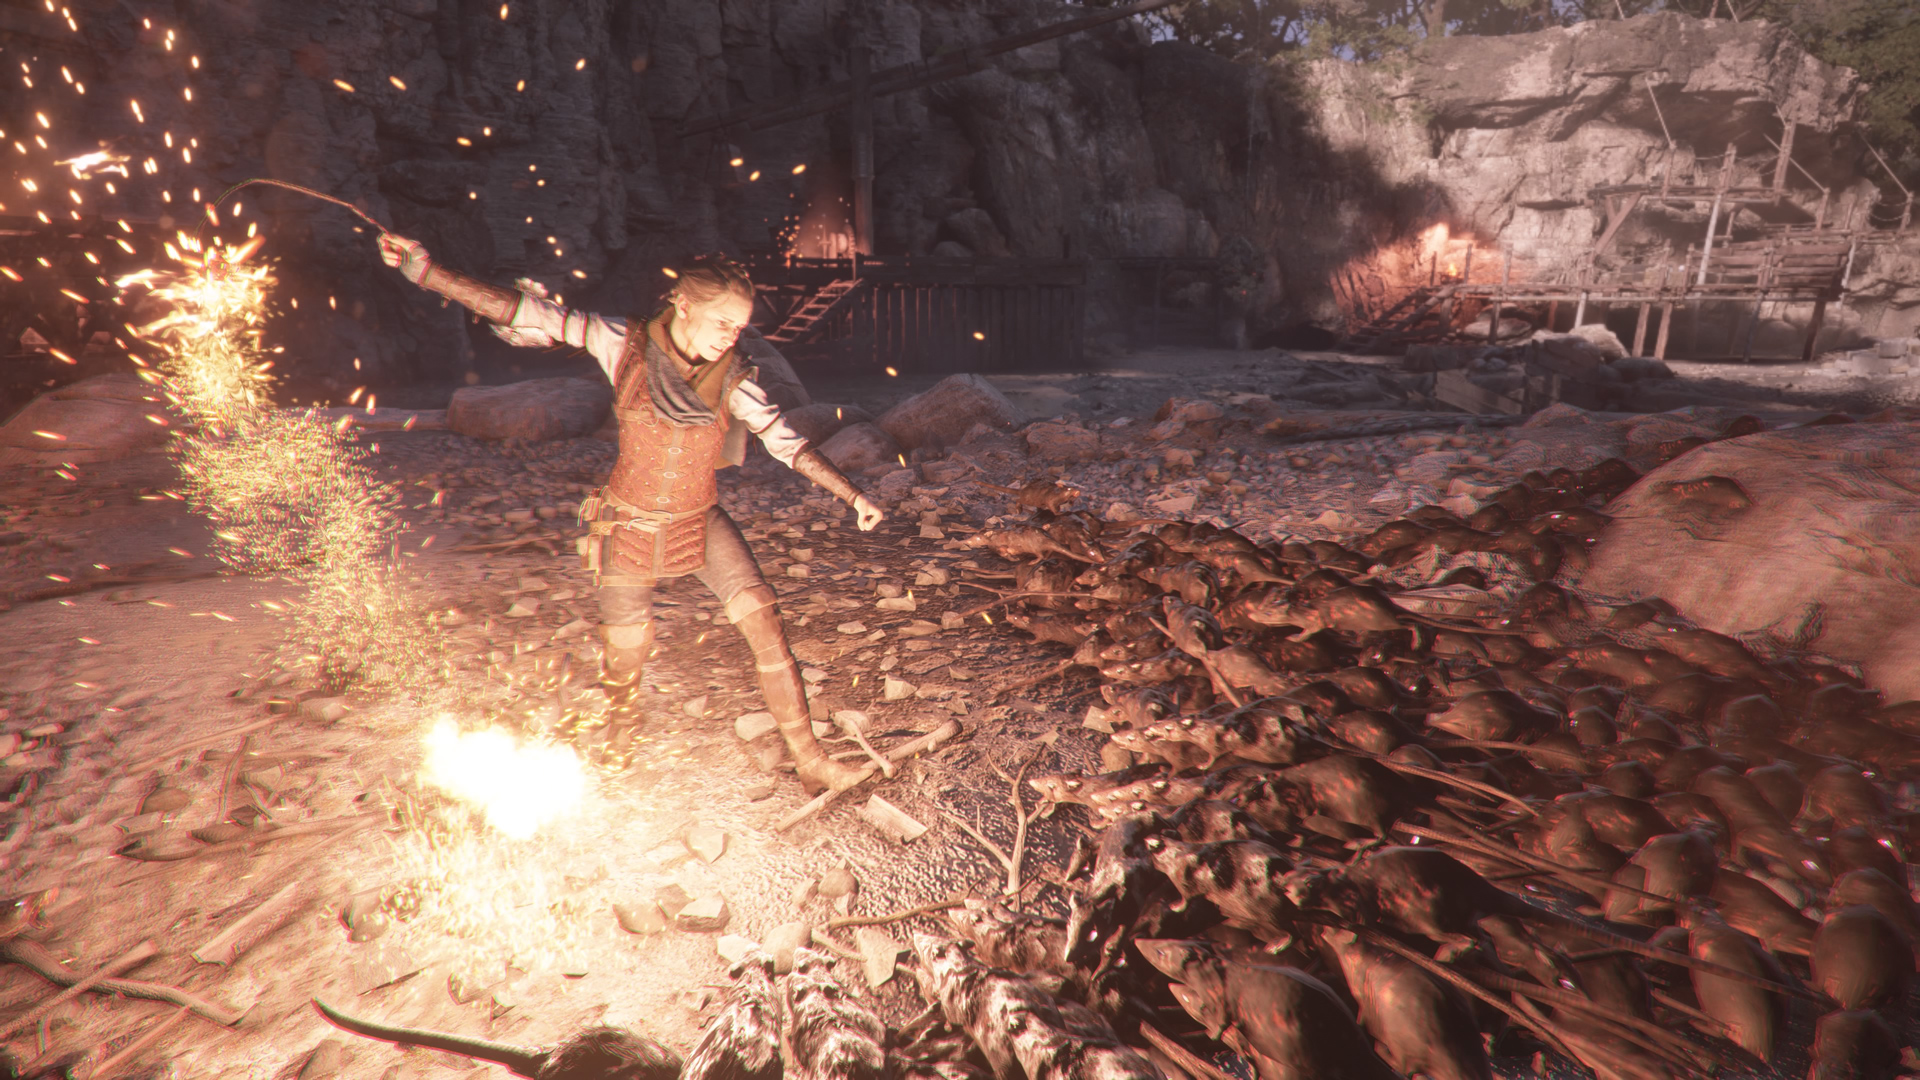 A Plague Tale Requiem boasts a million players and glowing reviews